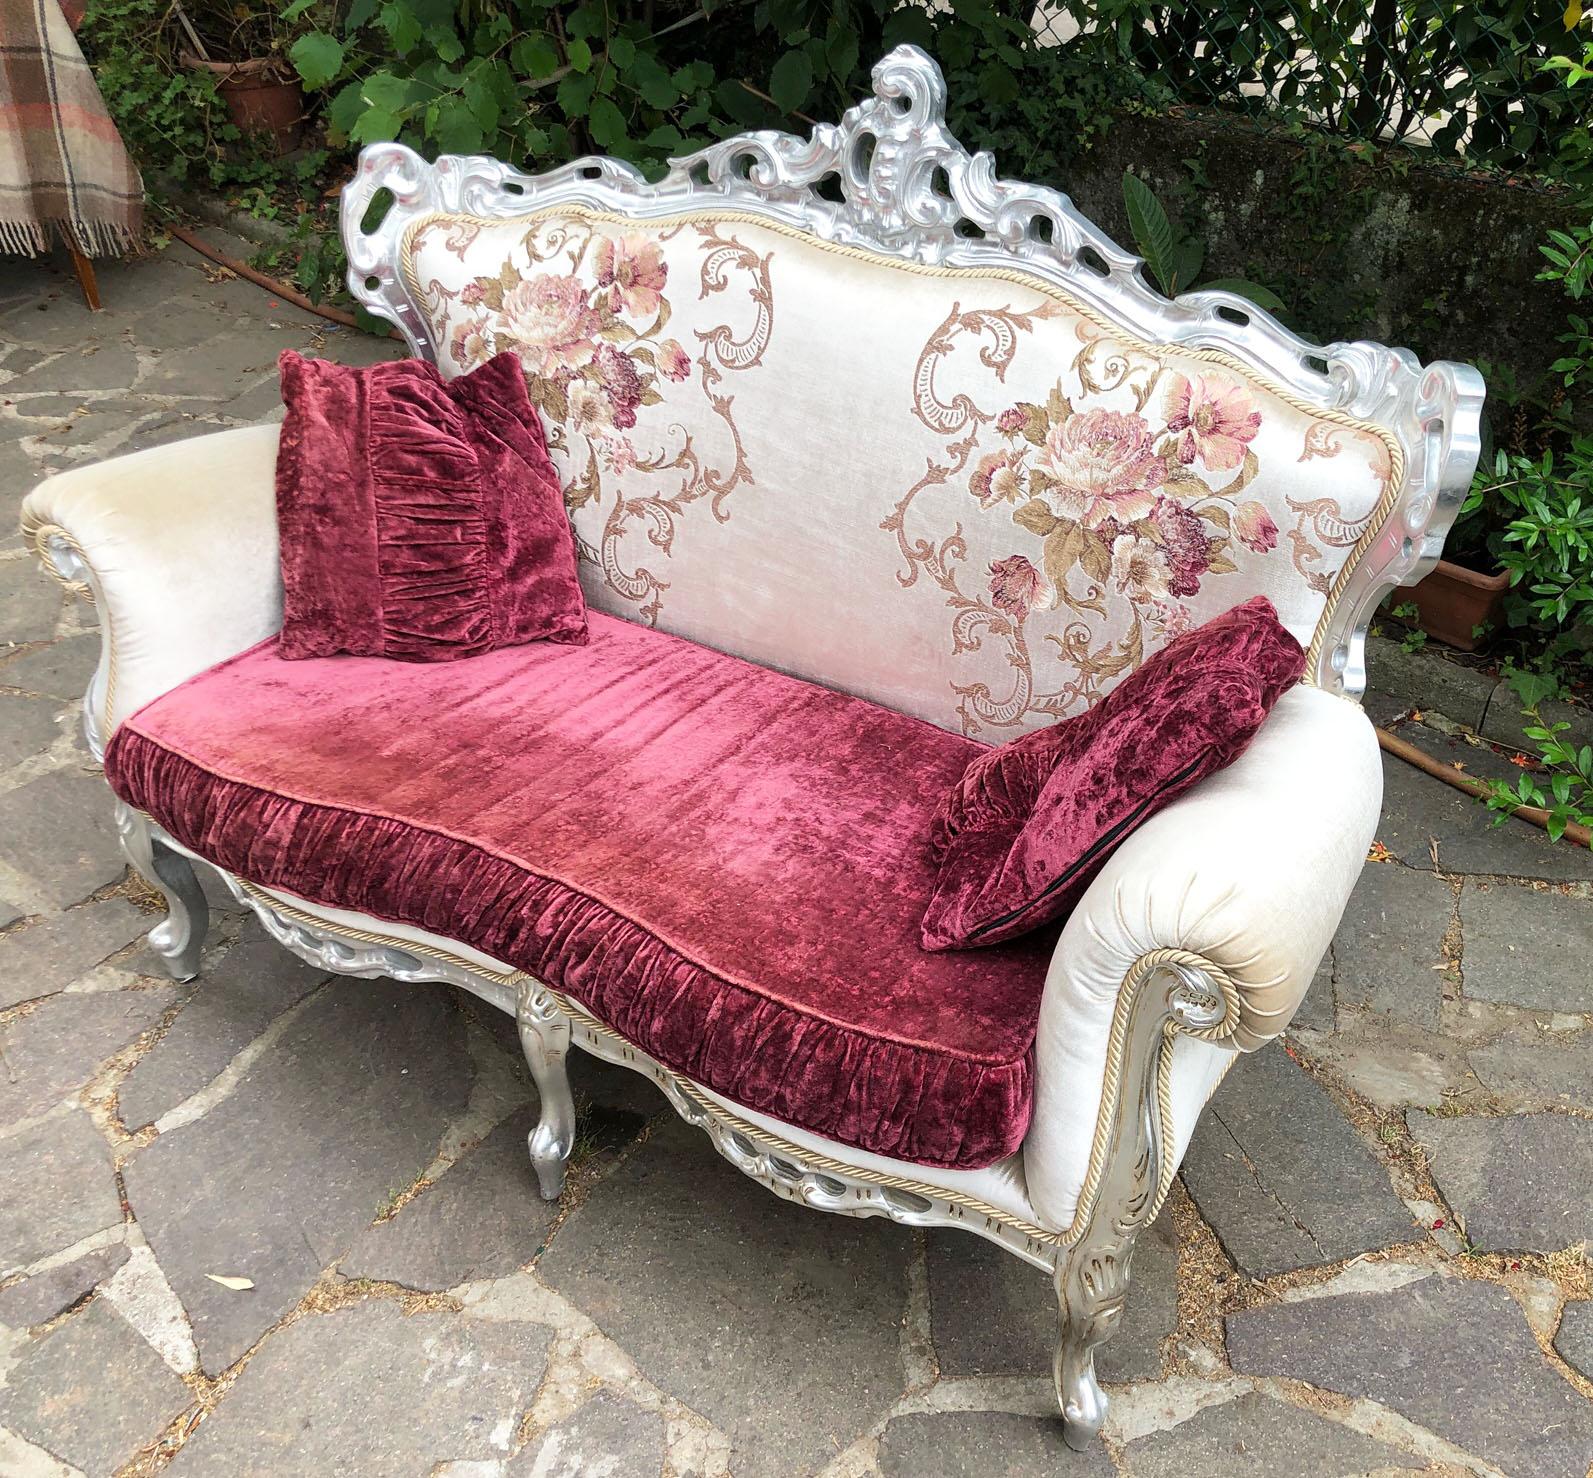 Very elegant silver fabric sofa with floral motifs and Bordeaux velvet.
The fabric is in good condition.
Good size and color. 
Comes from an old country house in the Lucca area of Tuscany.
It was placed opposite the bed in a large bedroom.
As